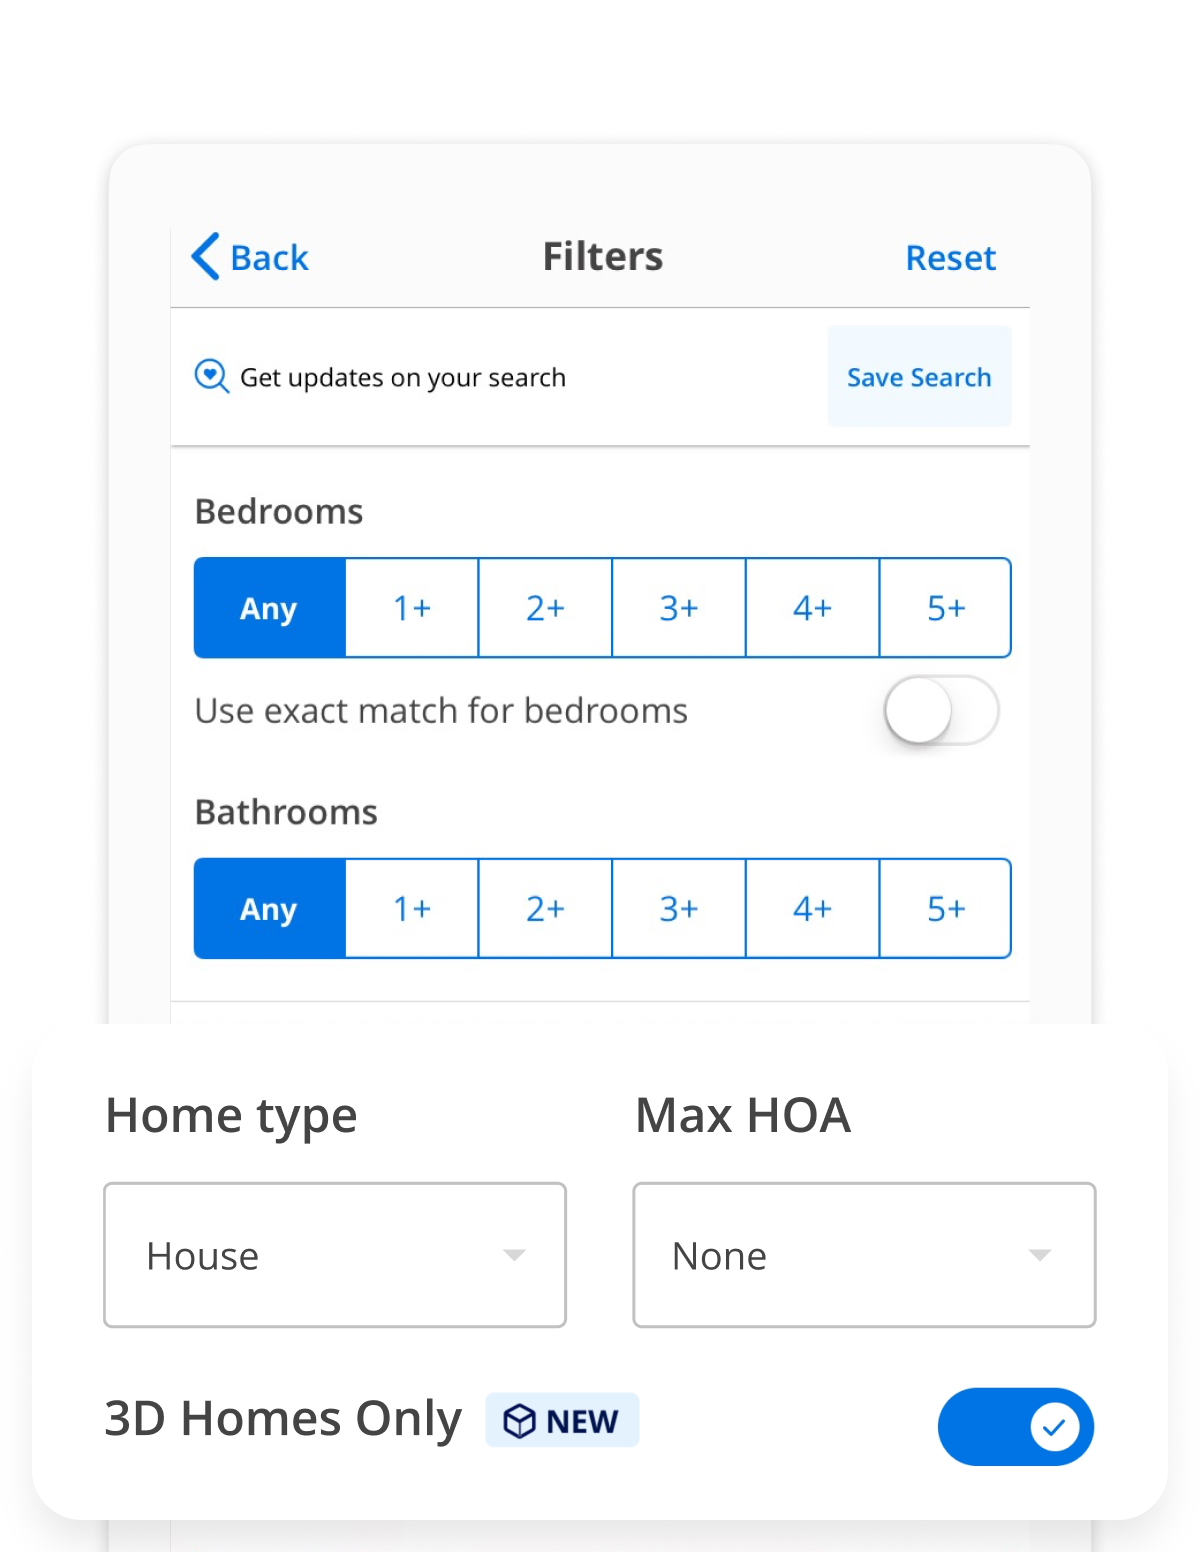 Zillow home search filters: bedrooms, bathrooms, home type, and max HOA.